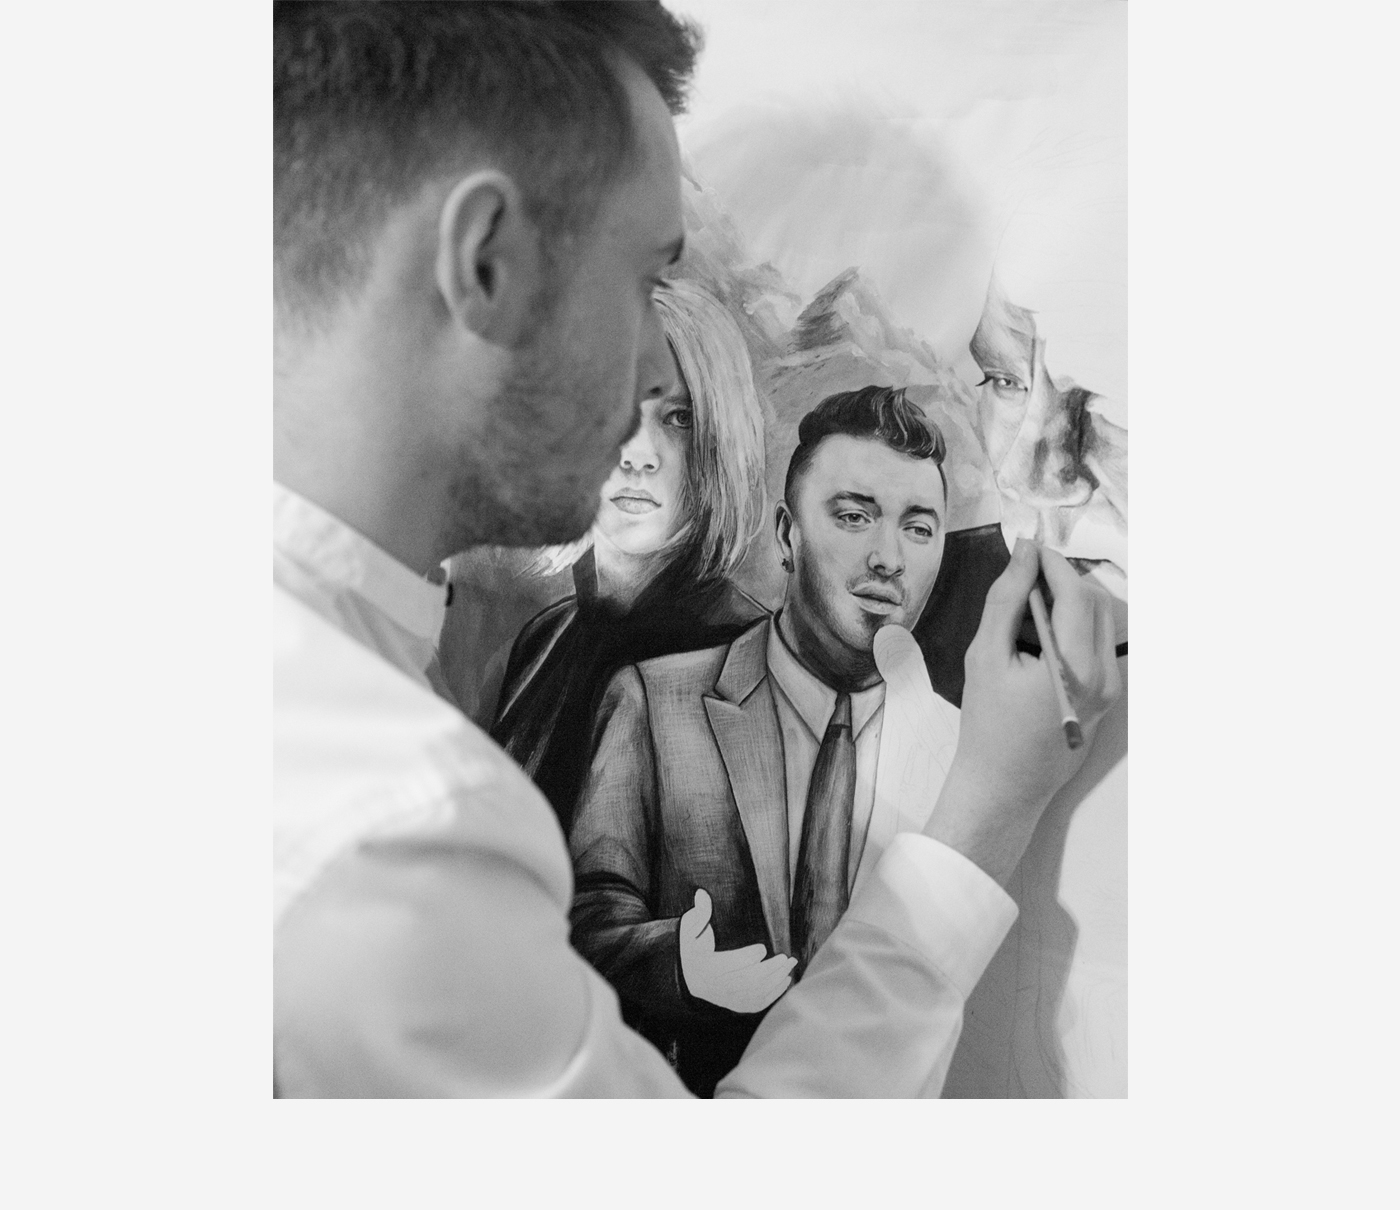 james Bond spectre sam smith james bond Sam Smith writing's on the wall writing'sonthewall Promotion poster advertisement Sam Smith